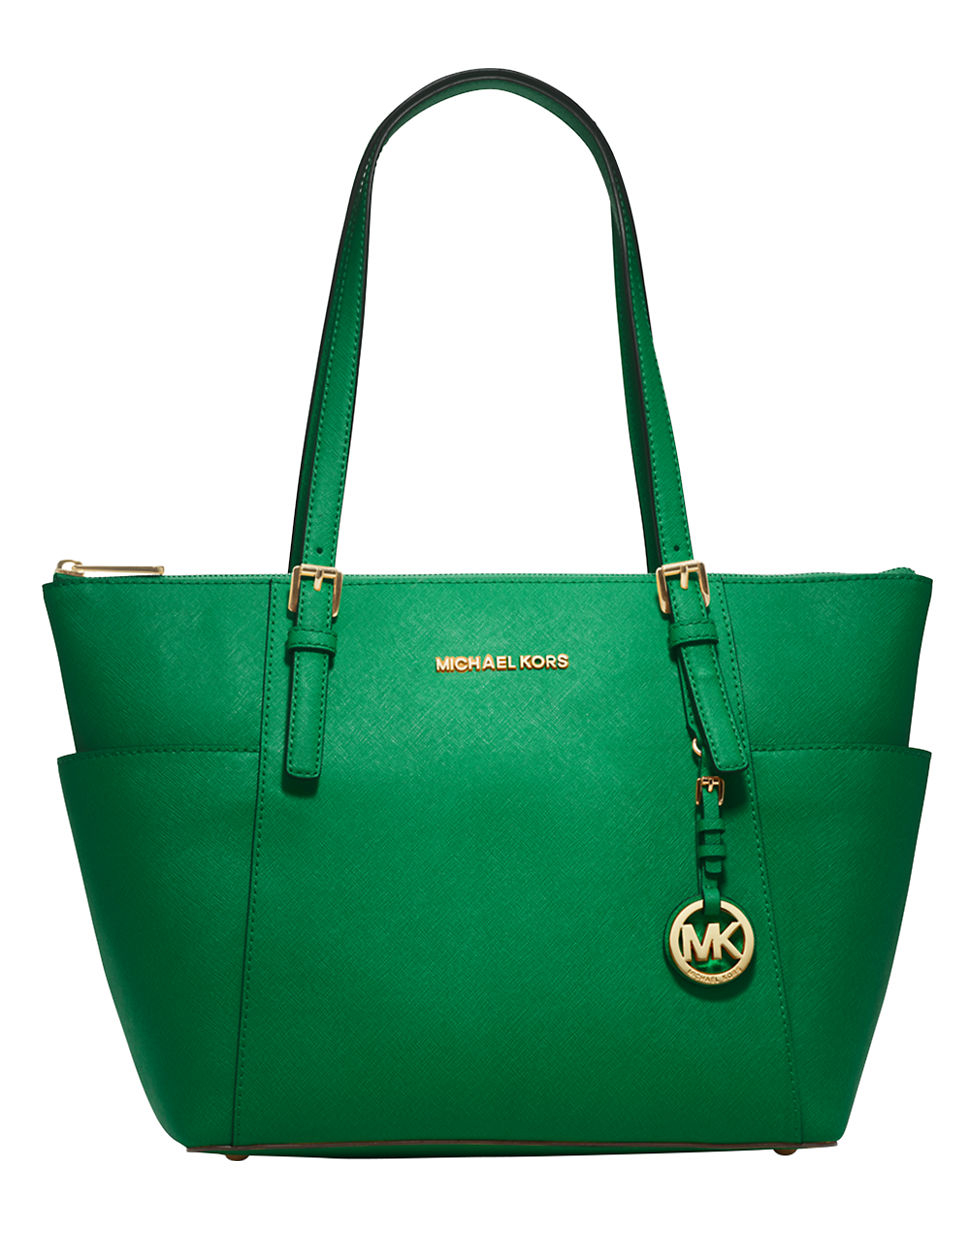 Lyst - Michael Michael Kors Jet Set East West Leather Tote Bag in Green